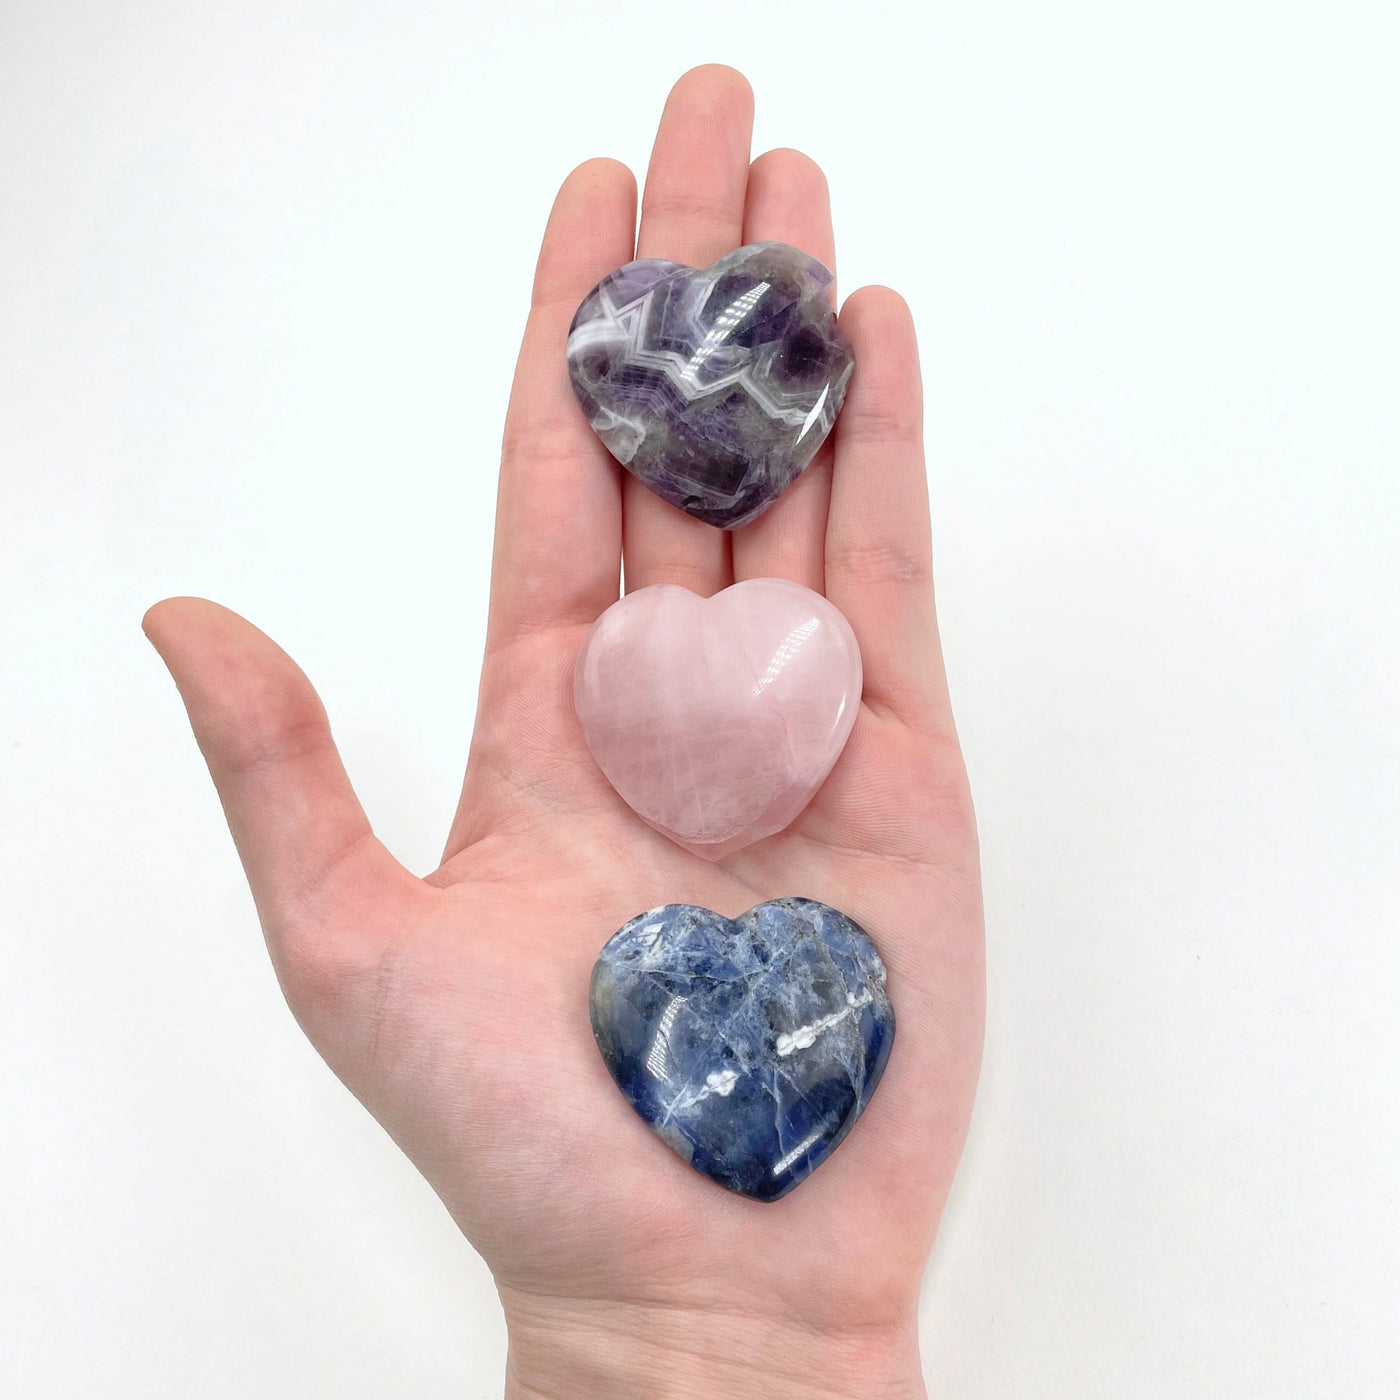 all three polished heart stone options in hand for size reference